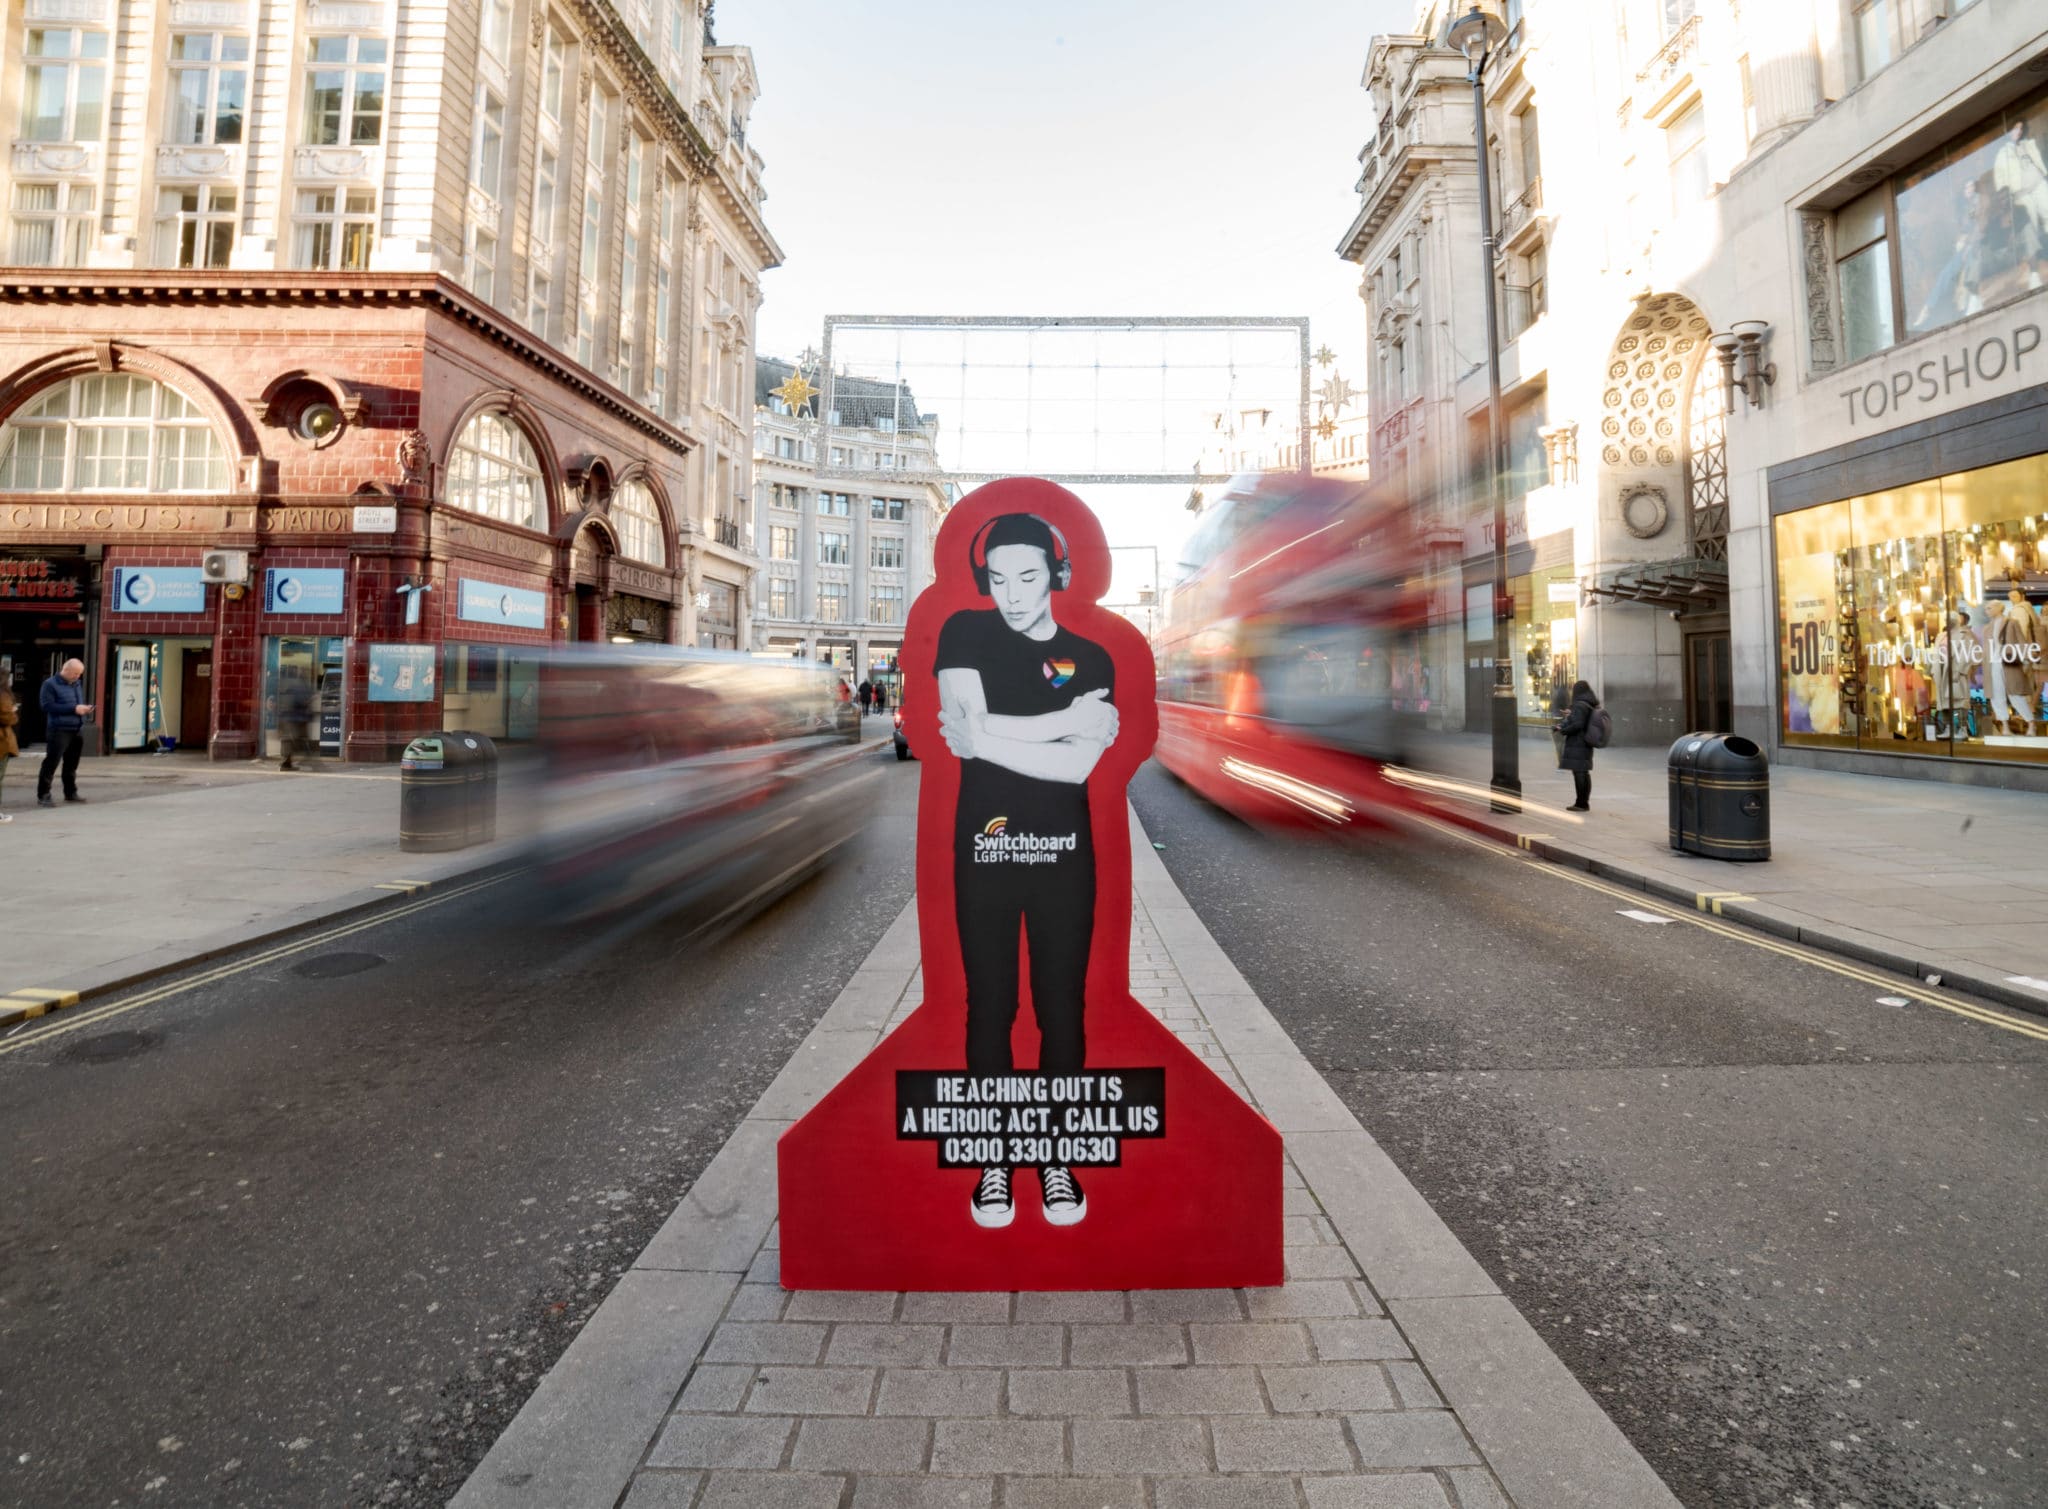 Christmas: Switchboard has teamed up with street artist Pegasus to create an artwork promoting the helpline number over the holidays.